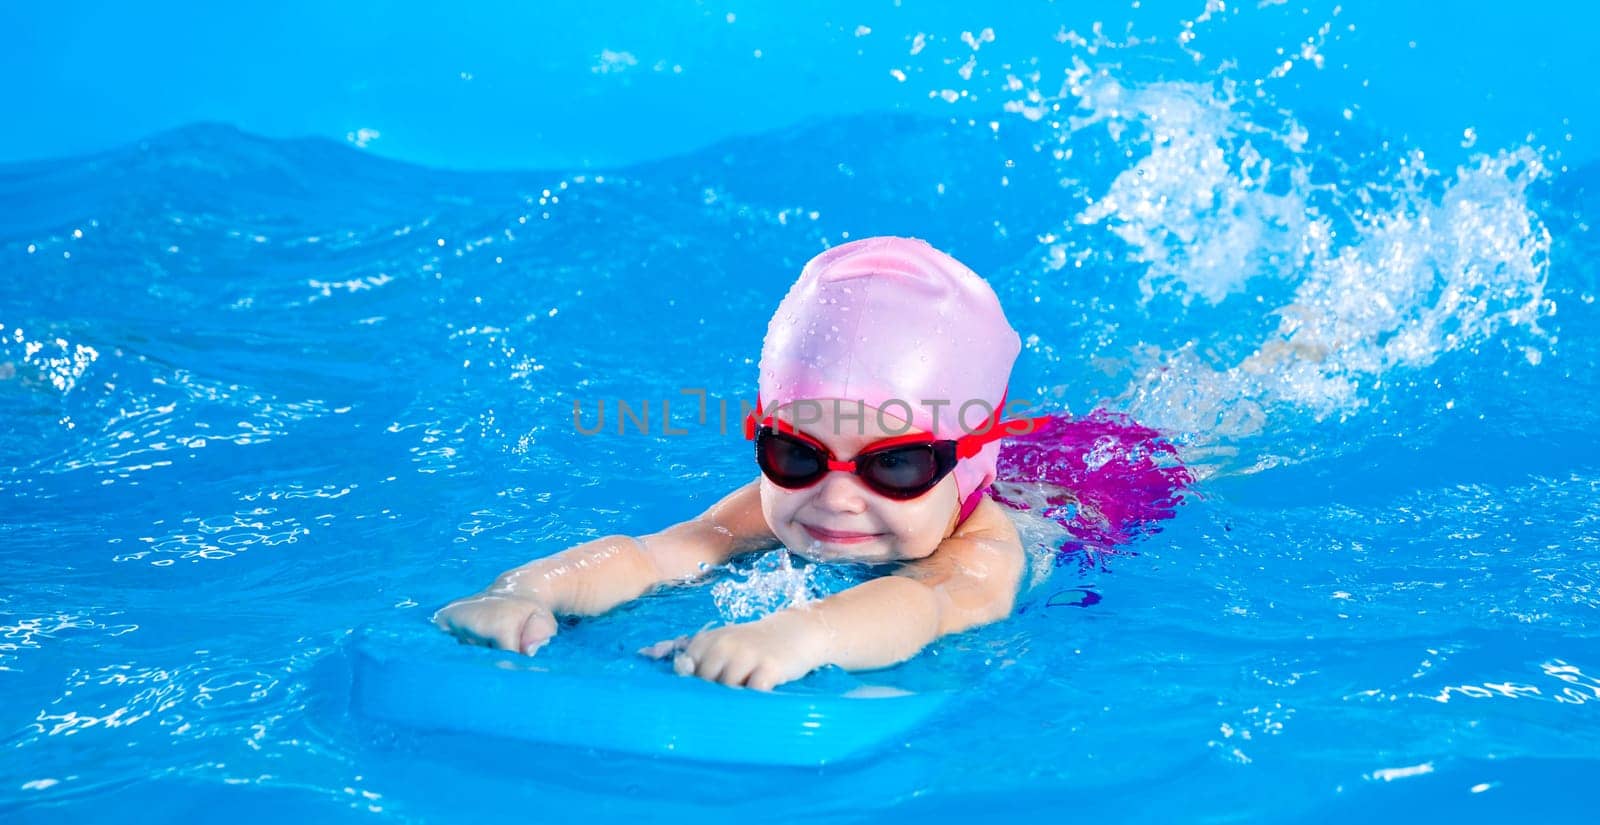 Little girl learning to swim in indoor pool with flutterboard by Mariakray